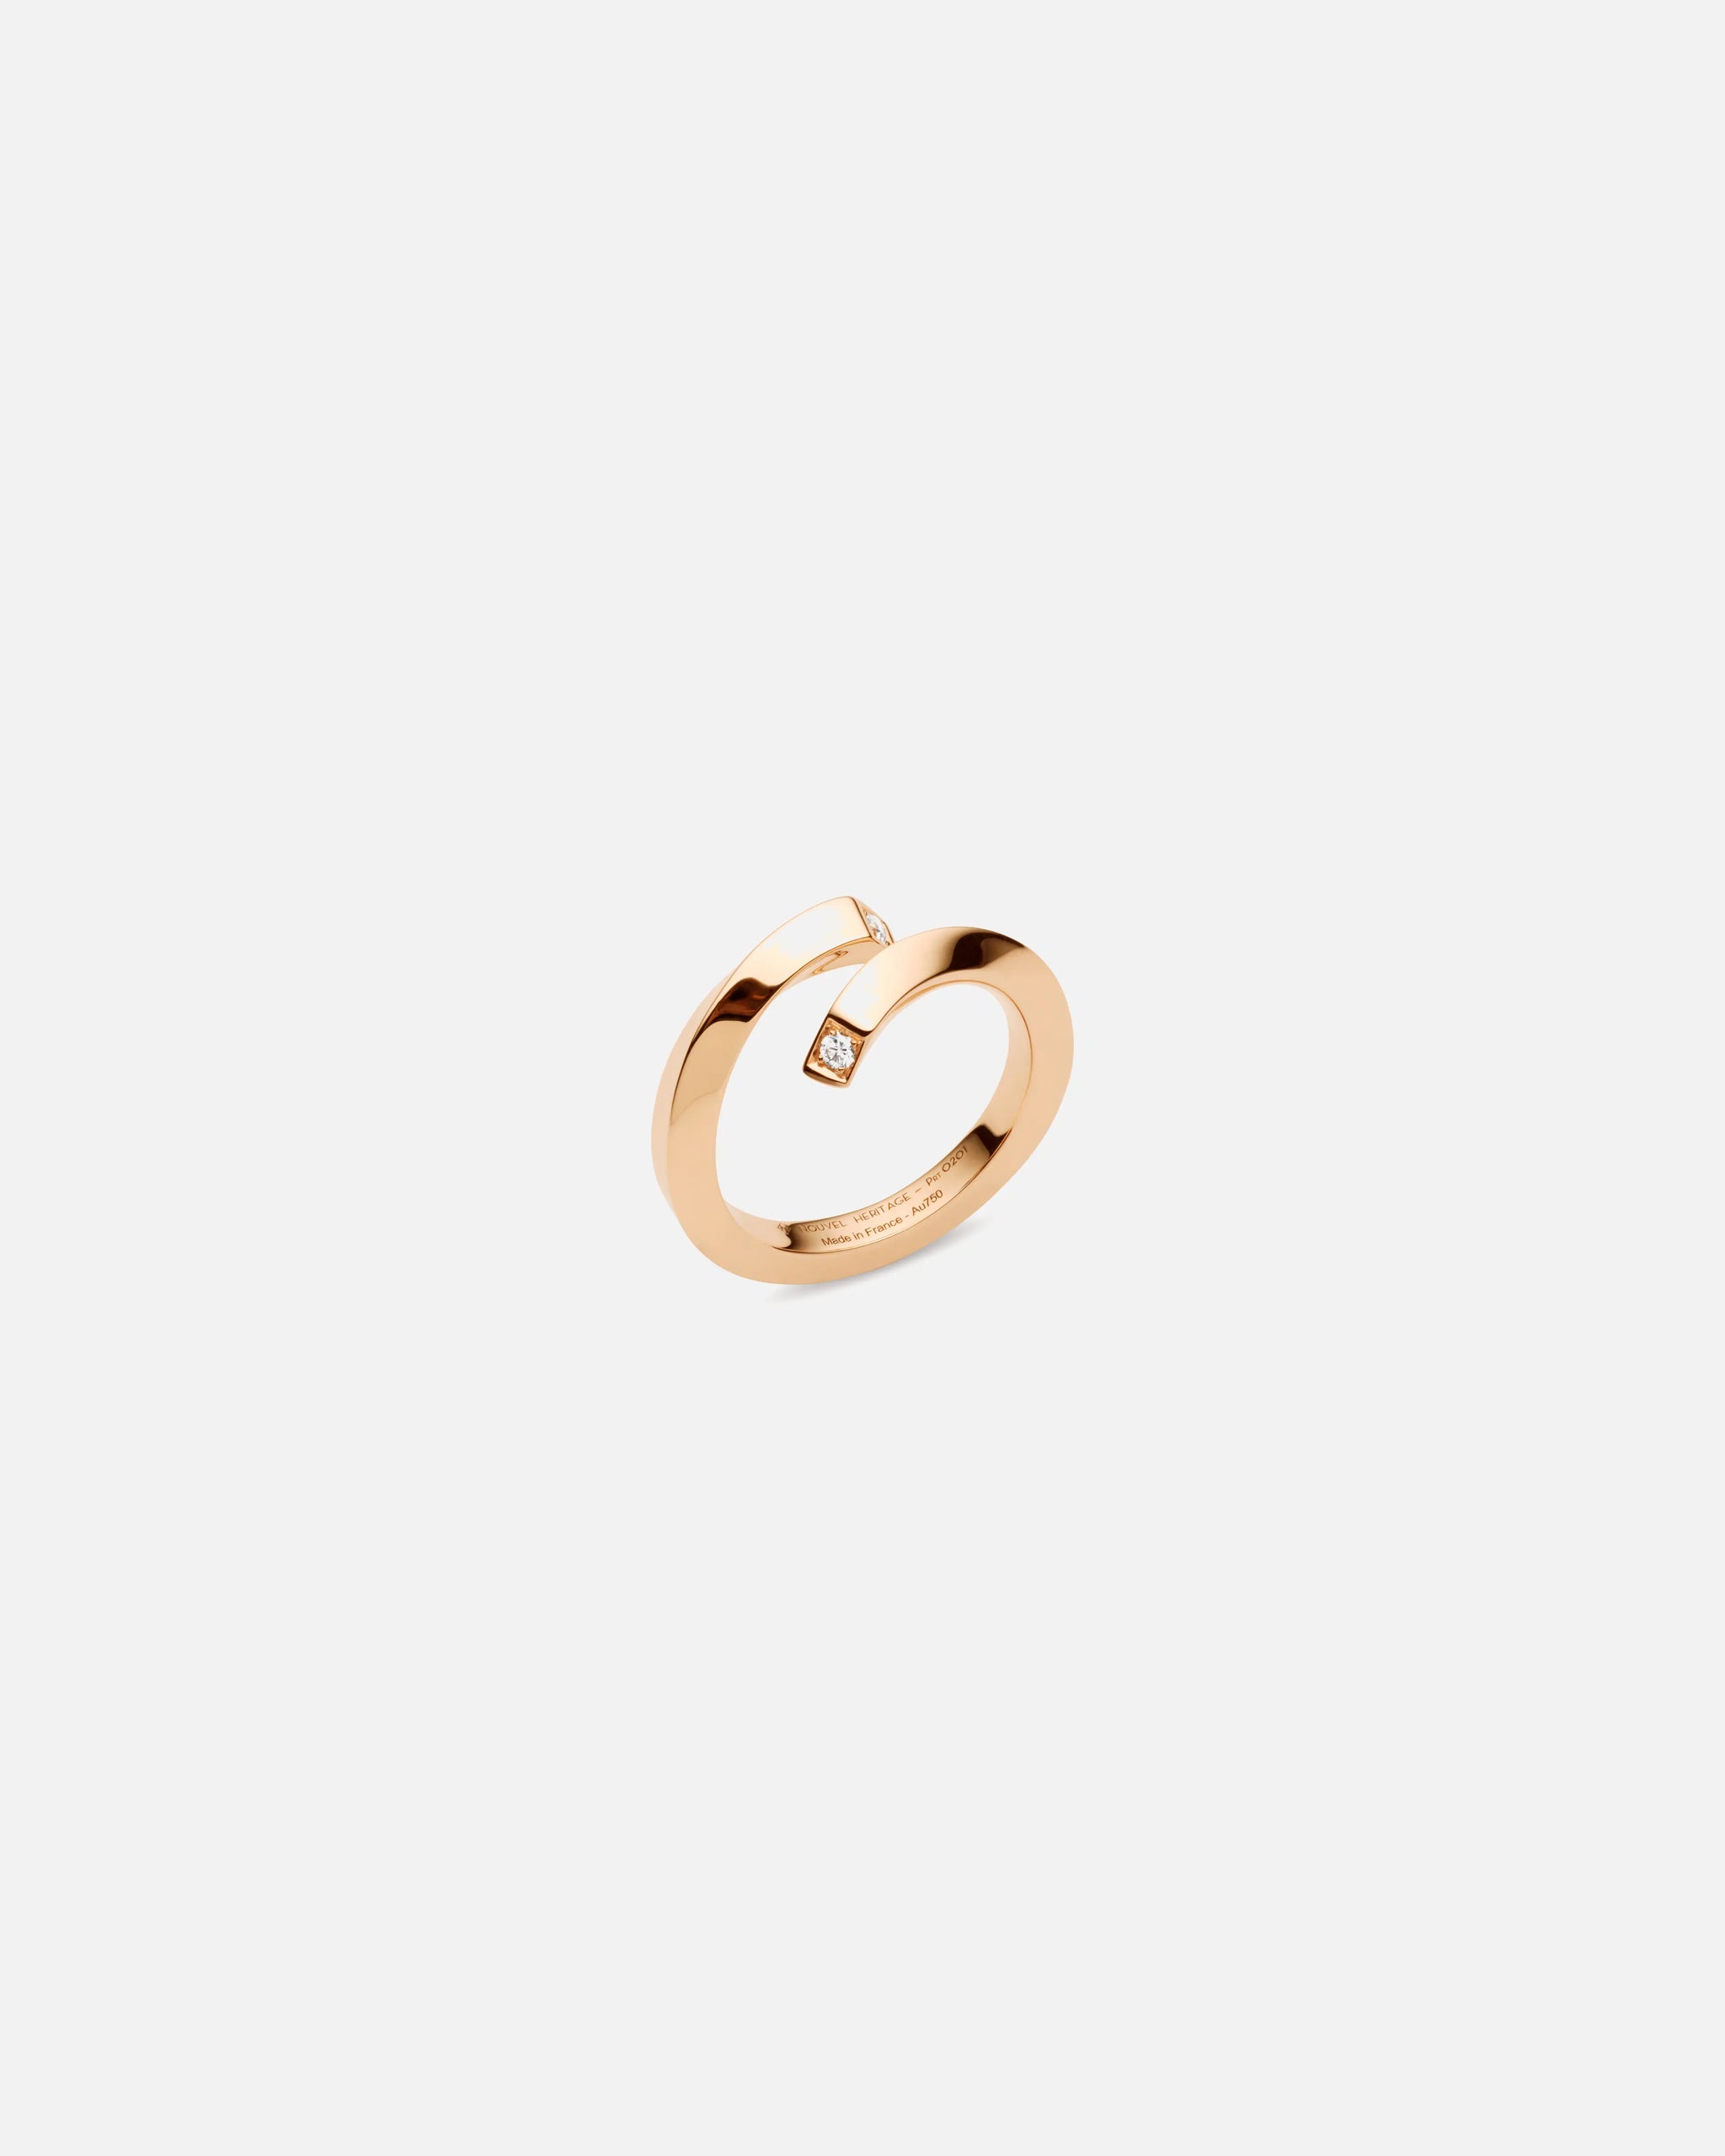 Rose Gold Thread Ring - 1 - Nouvel Heritage